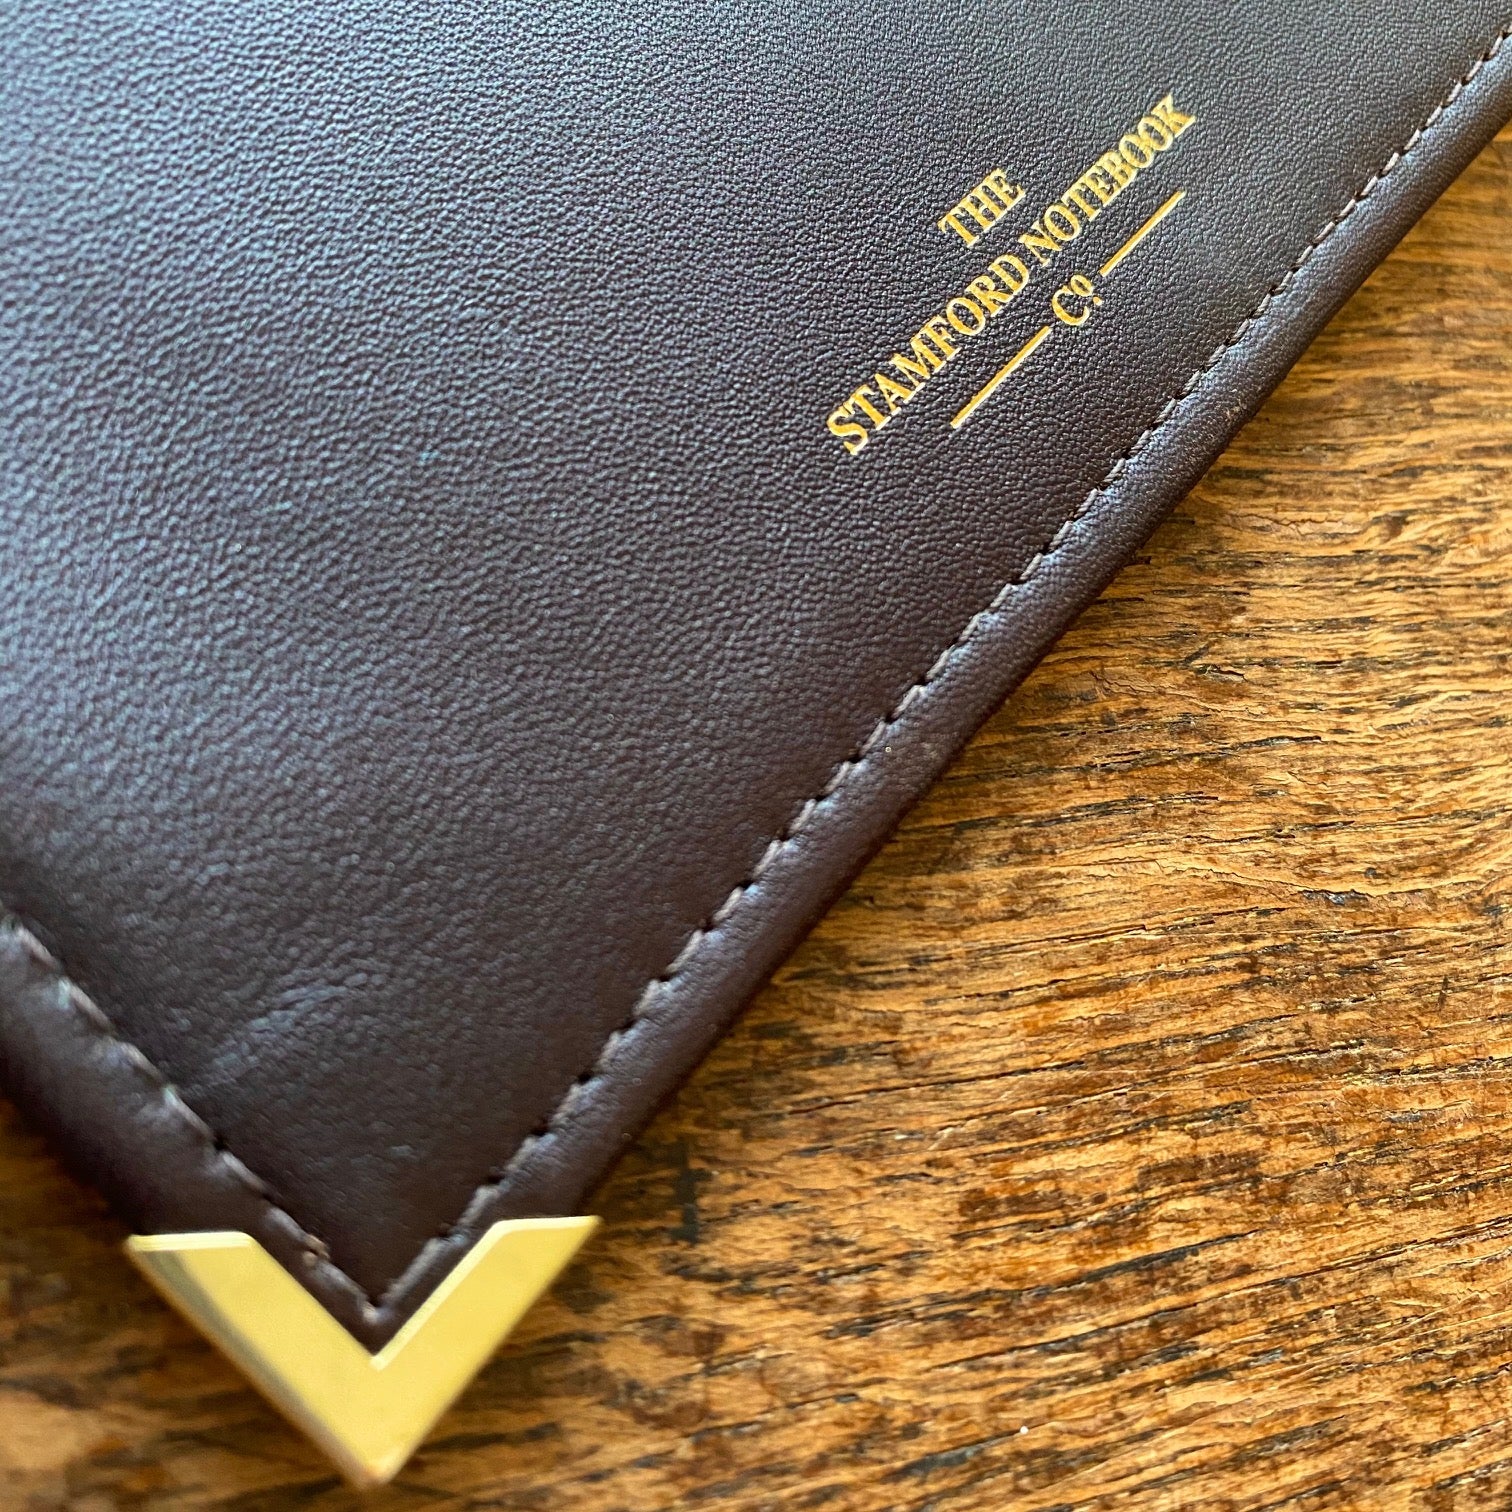 The Aurum Leather Cahier Cover - Dark Brown